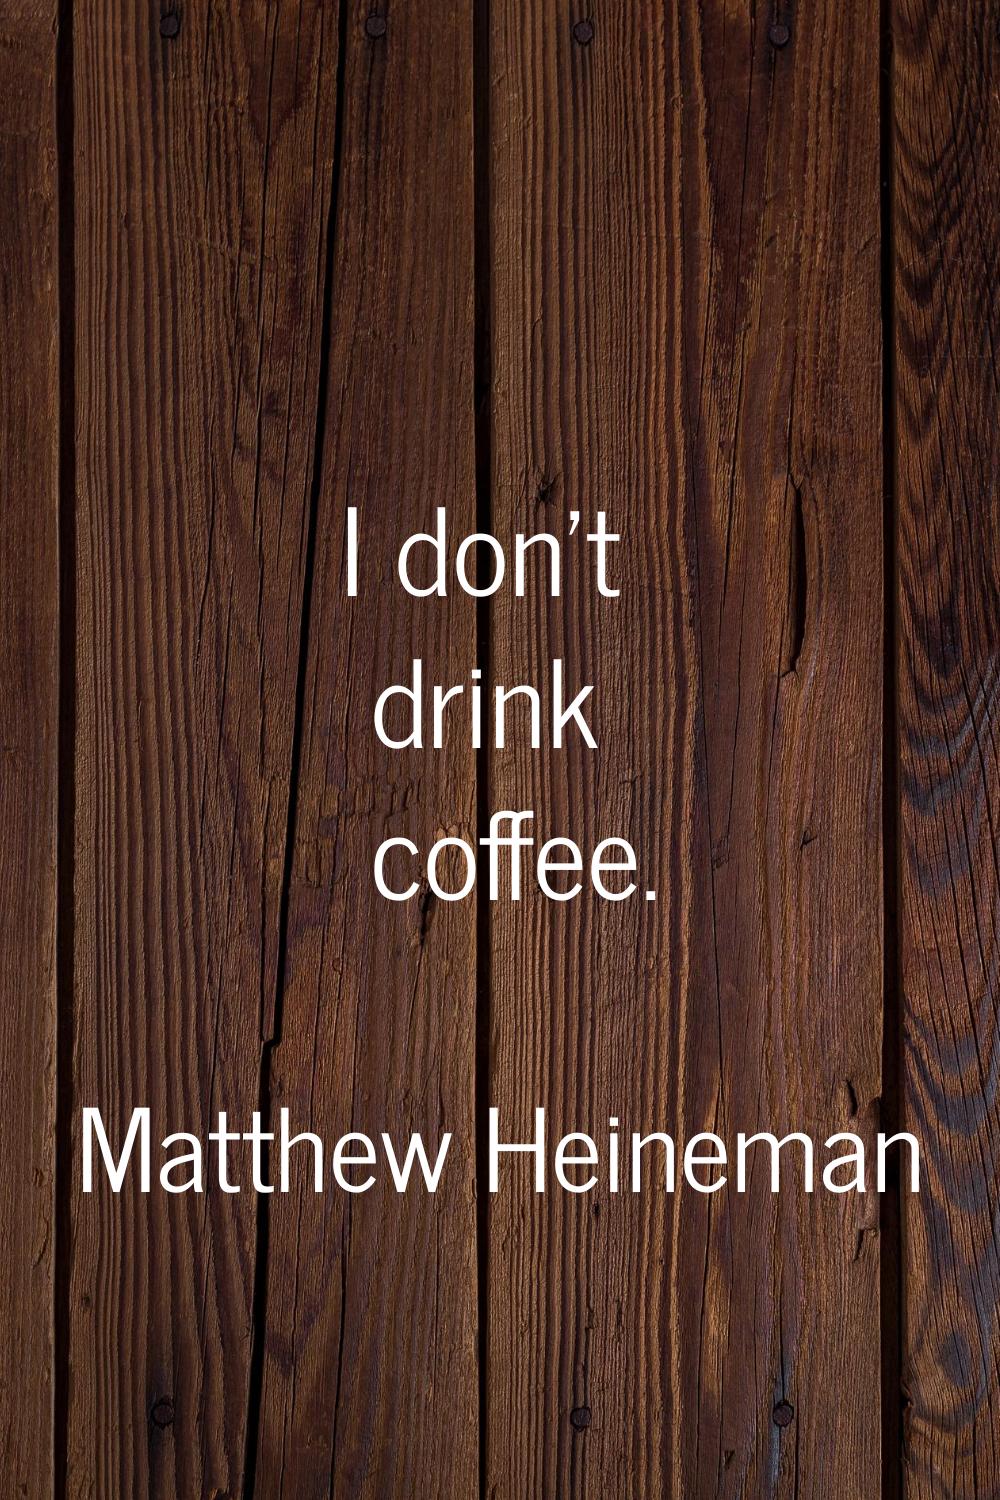 I don't drink coffee.